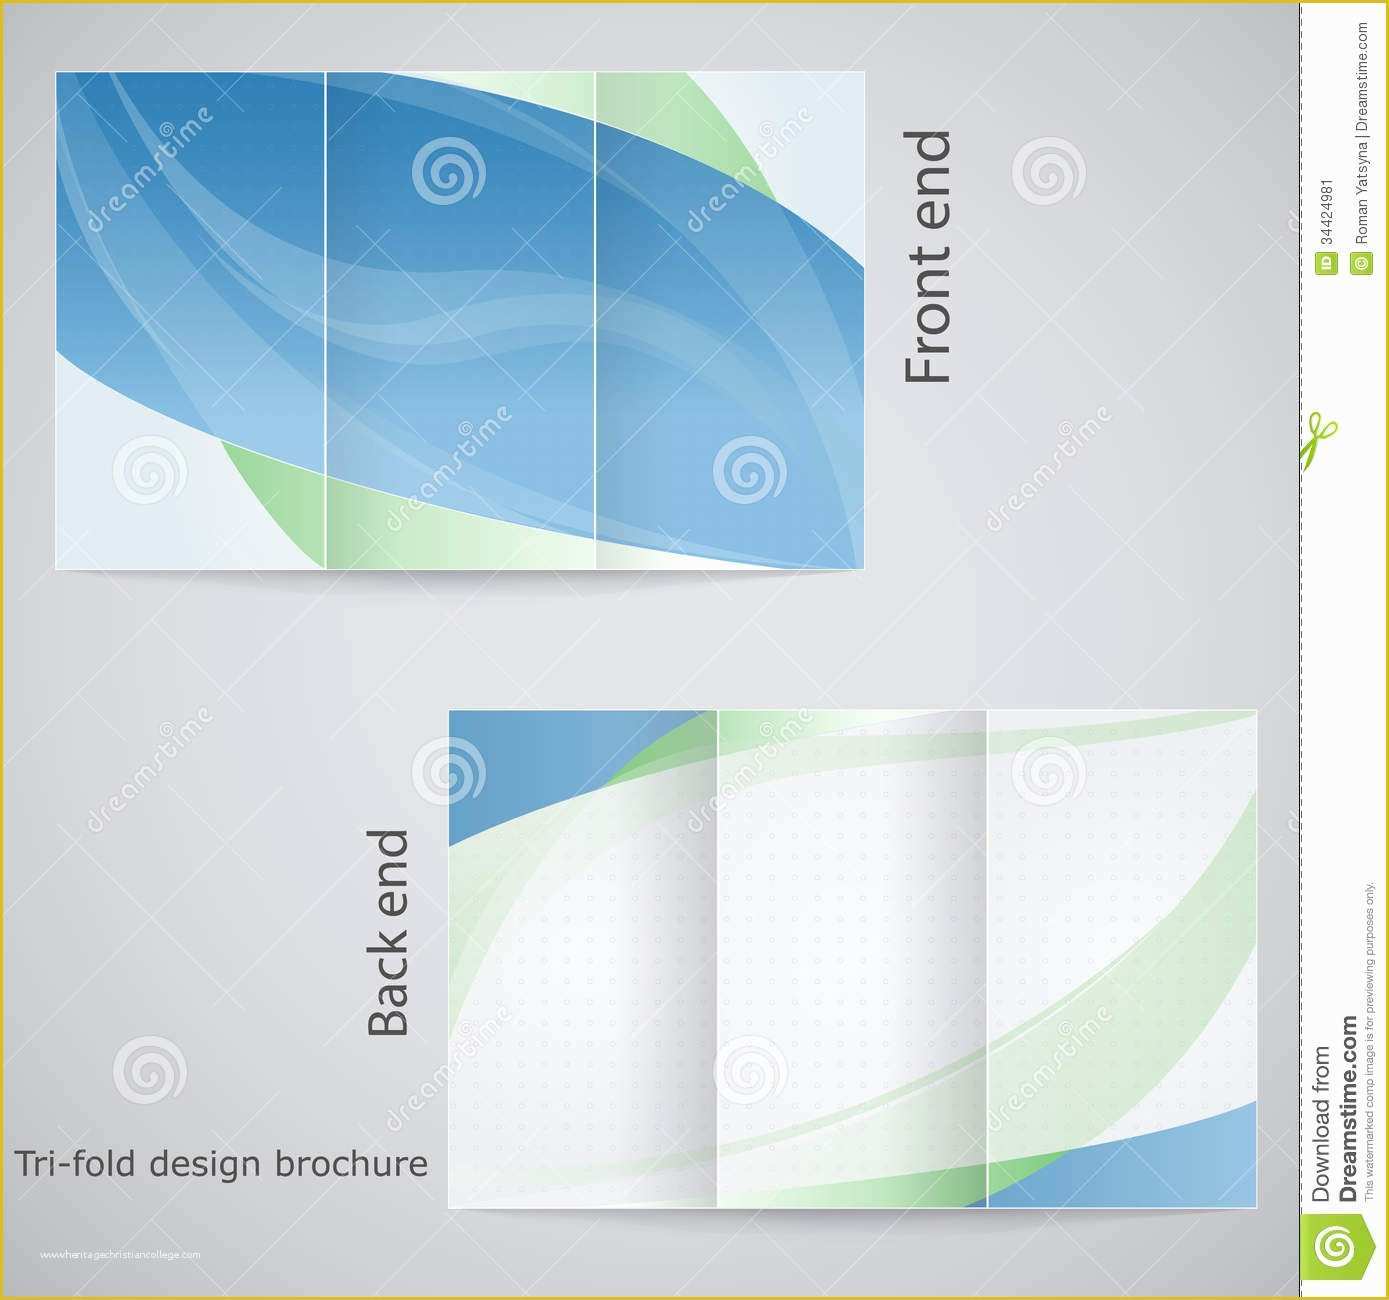 Brochure Layout Templates Free Download Of Tri Fold Brochure Design Stock Vector Illustration Of